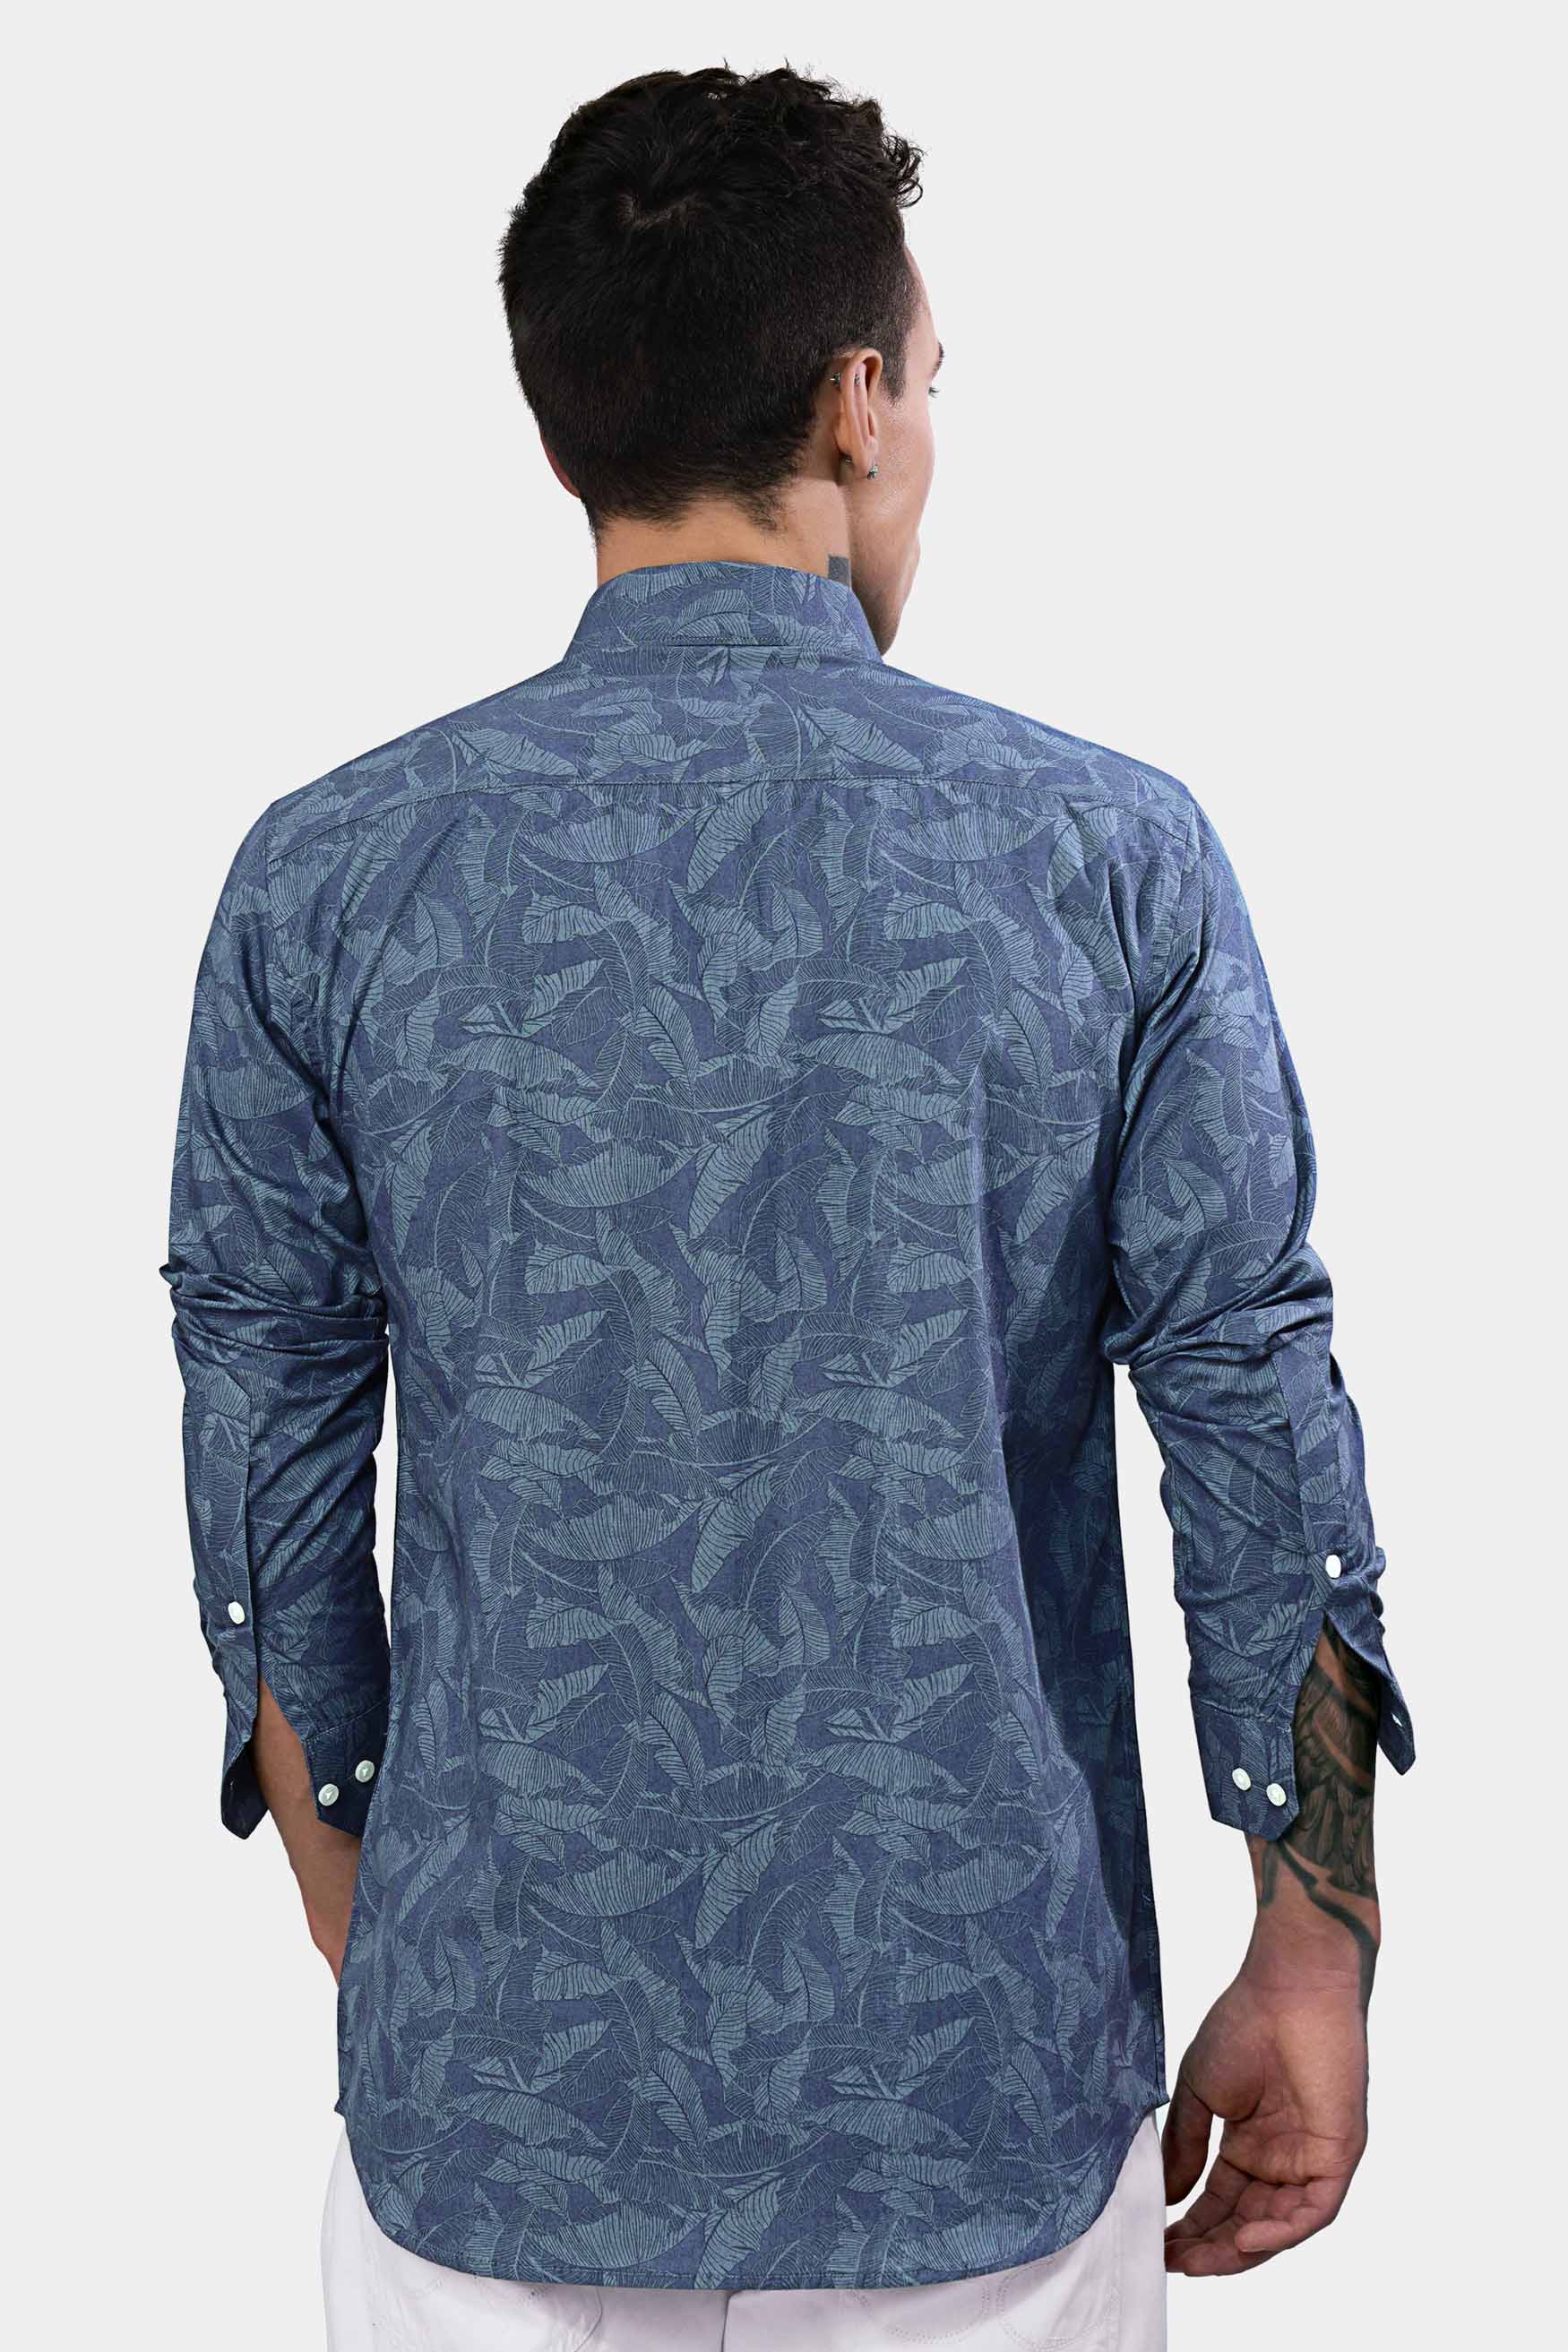 Slate Blue and Heather Gray Leaves Printed Premium Cotton Shirt